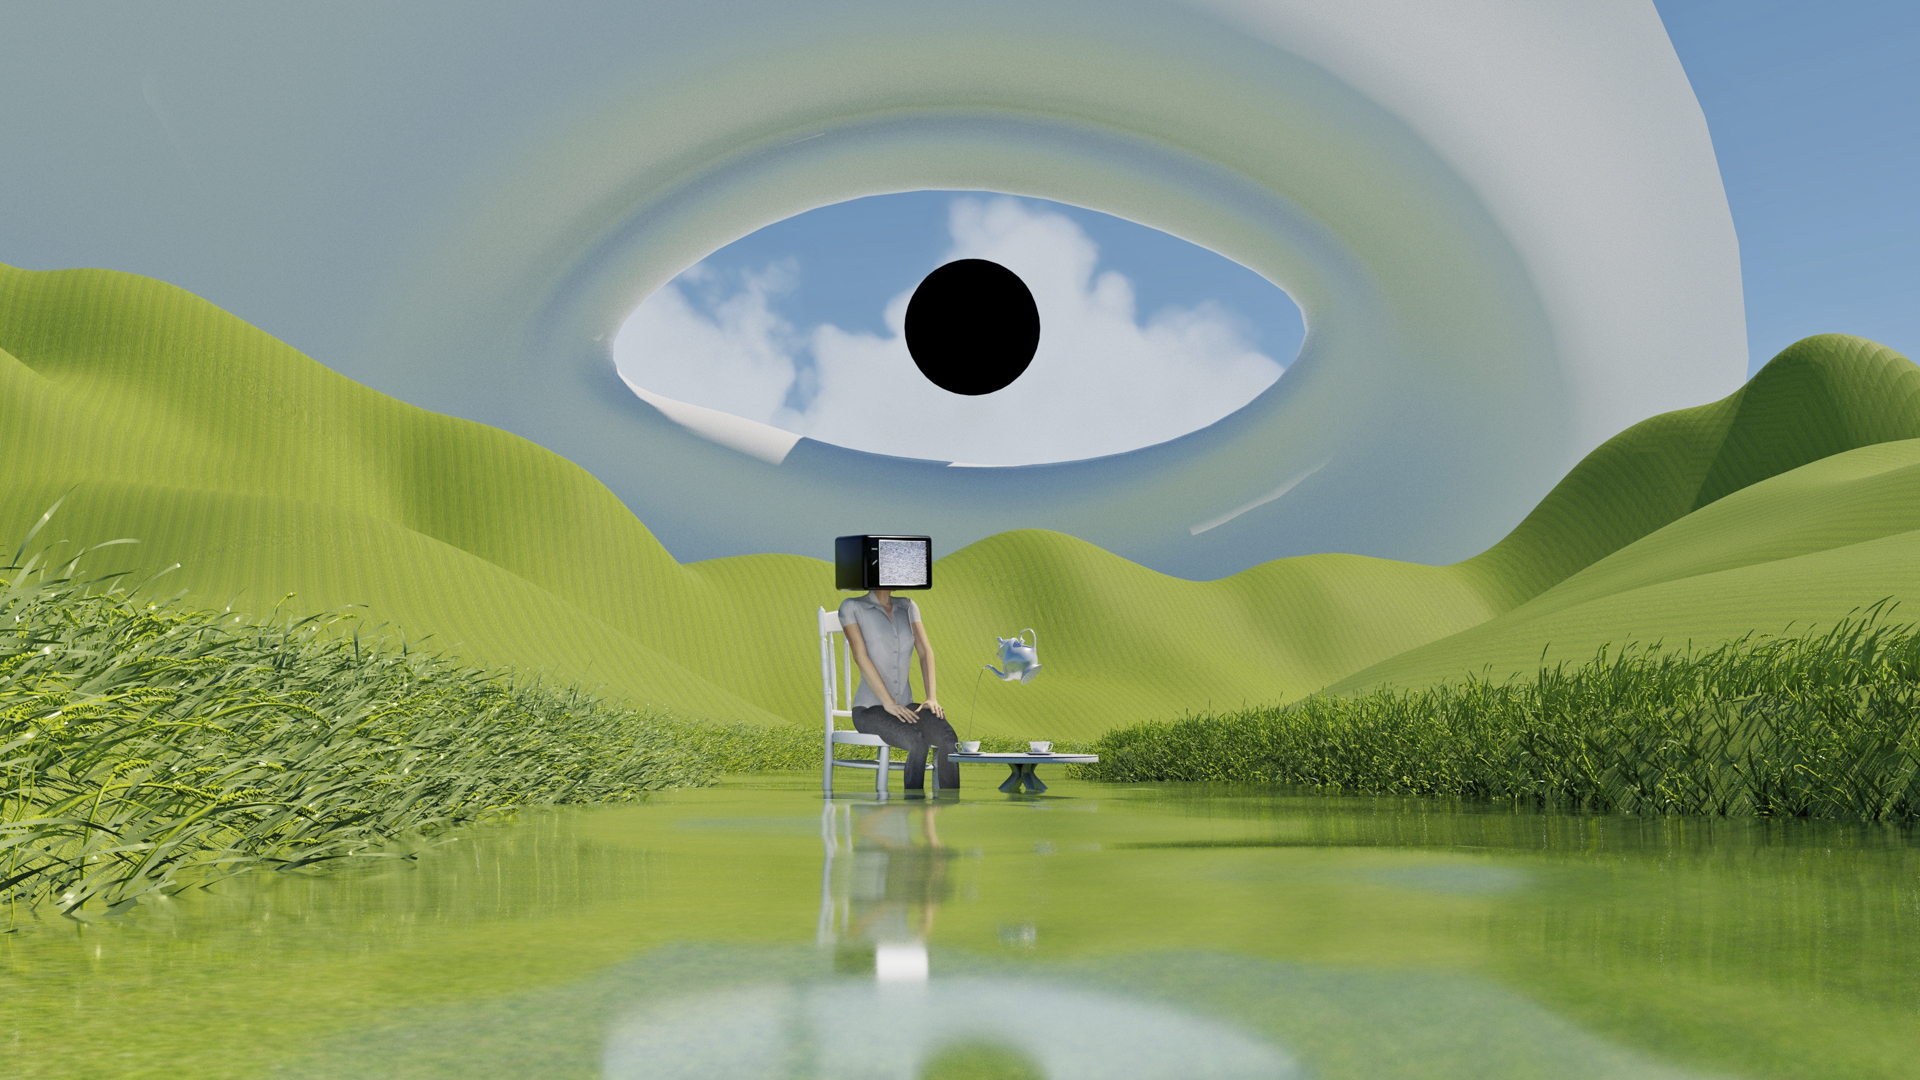 3d render of an eye in the skyline, greenery, and a person with an LCD-screen for a head